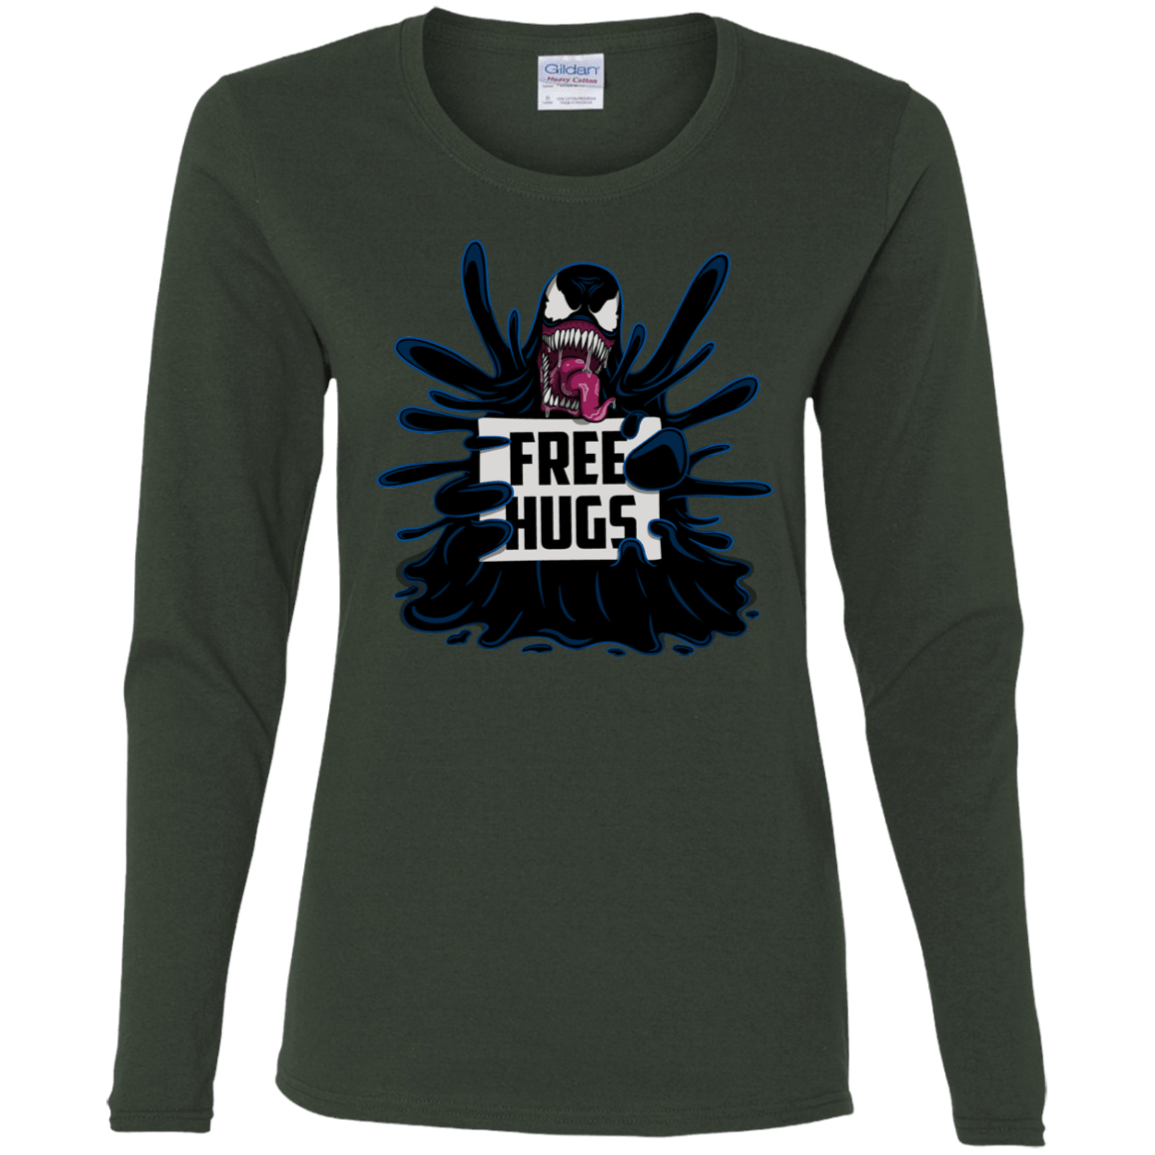 T-Shirts Forest / S Symbiote Hugs Women's Long Sleeve T-Shirt